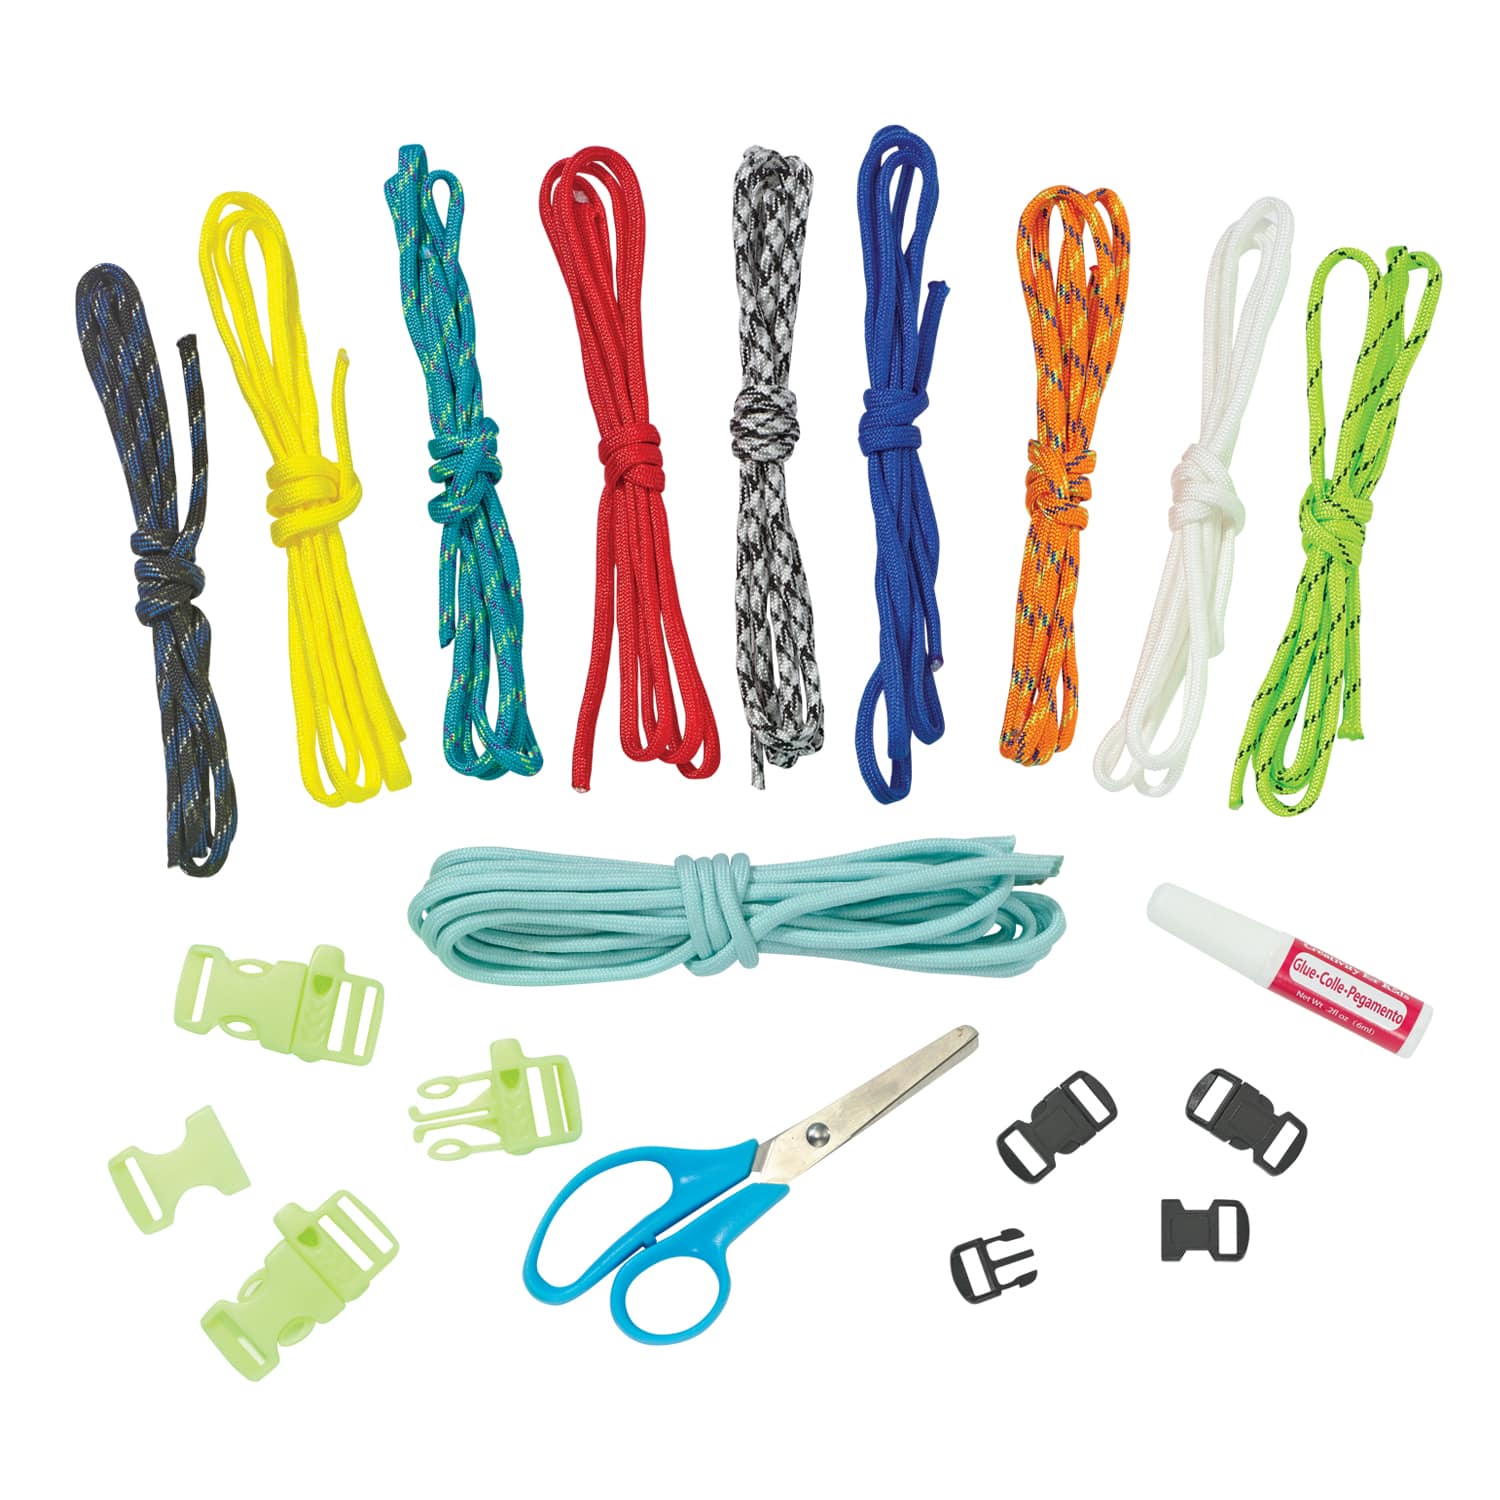 Creativity For Kids Glow-in-the-Dark Paracord Wristbands